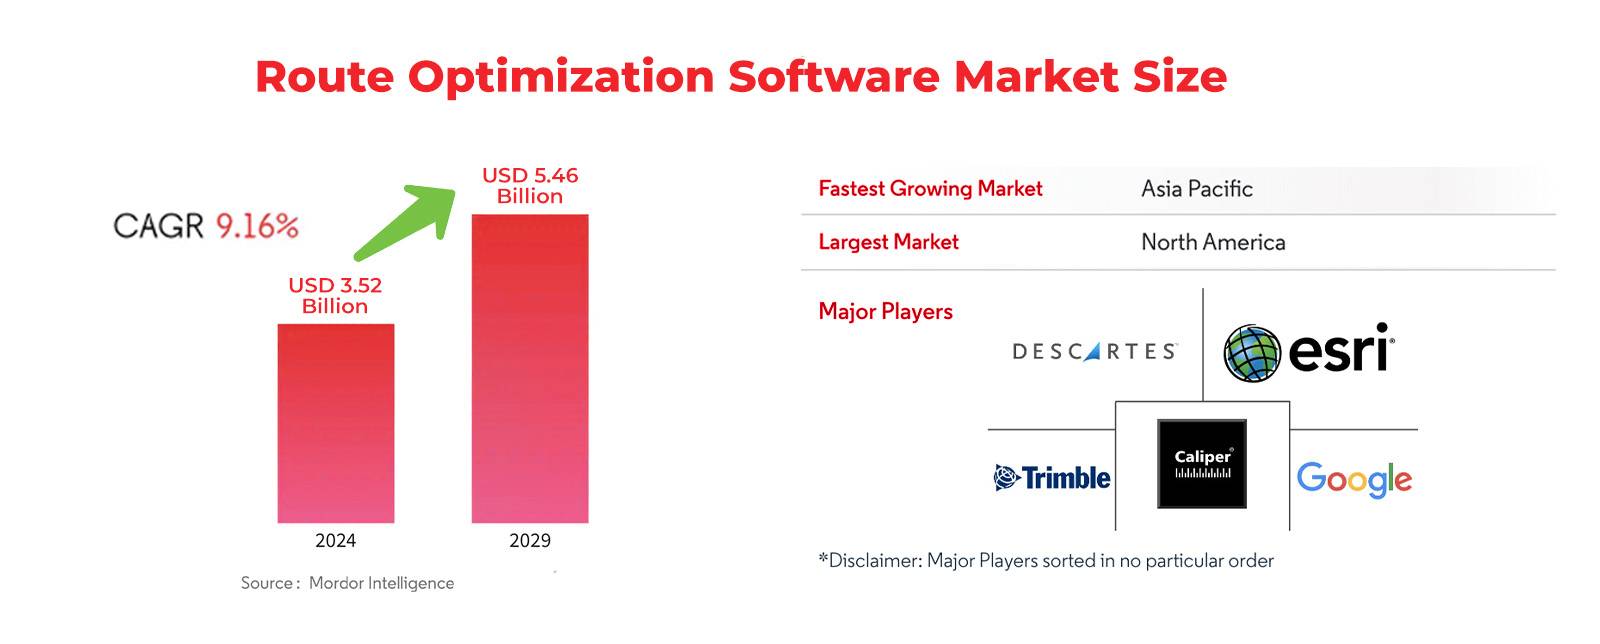 Route Optimization Software Market Size stats and trends